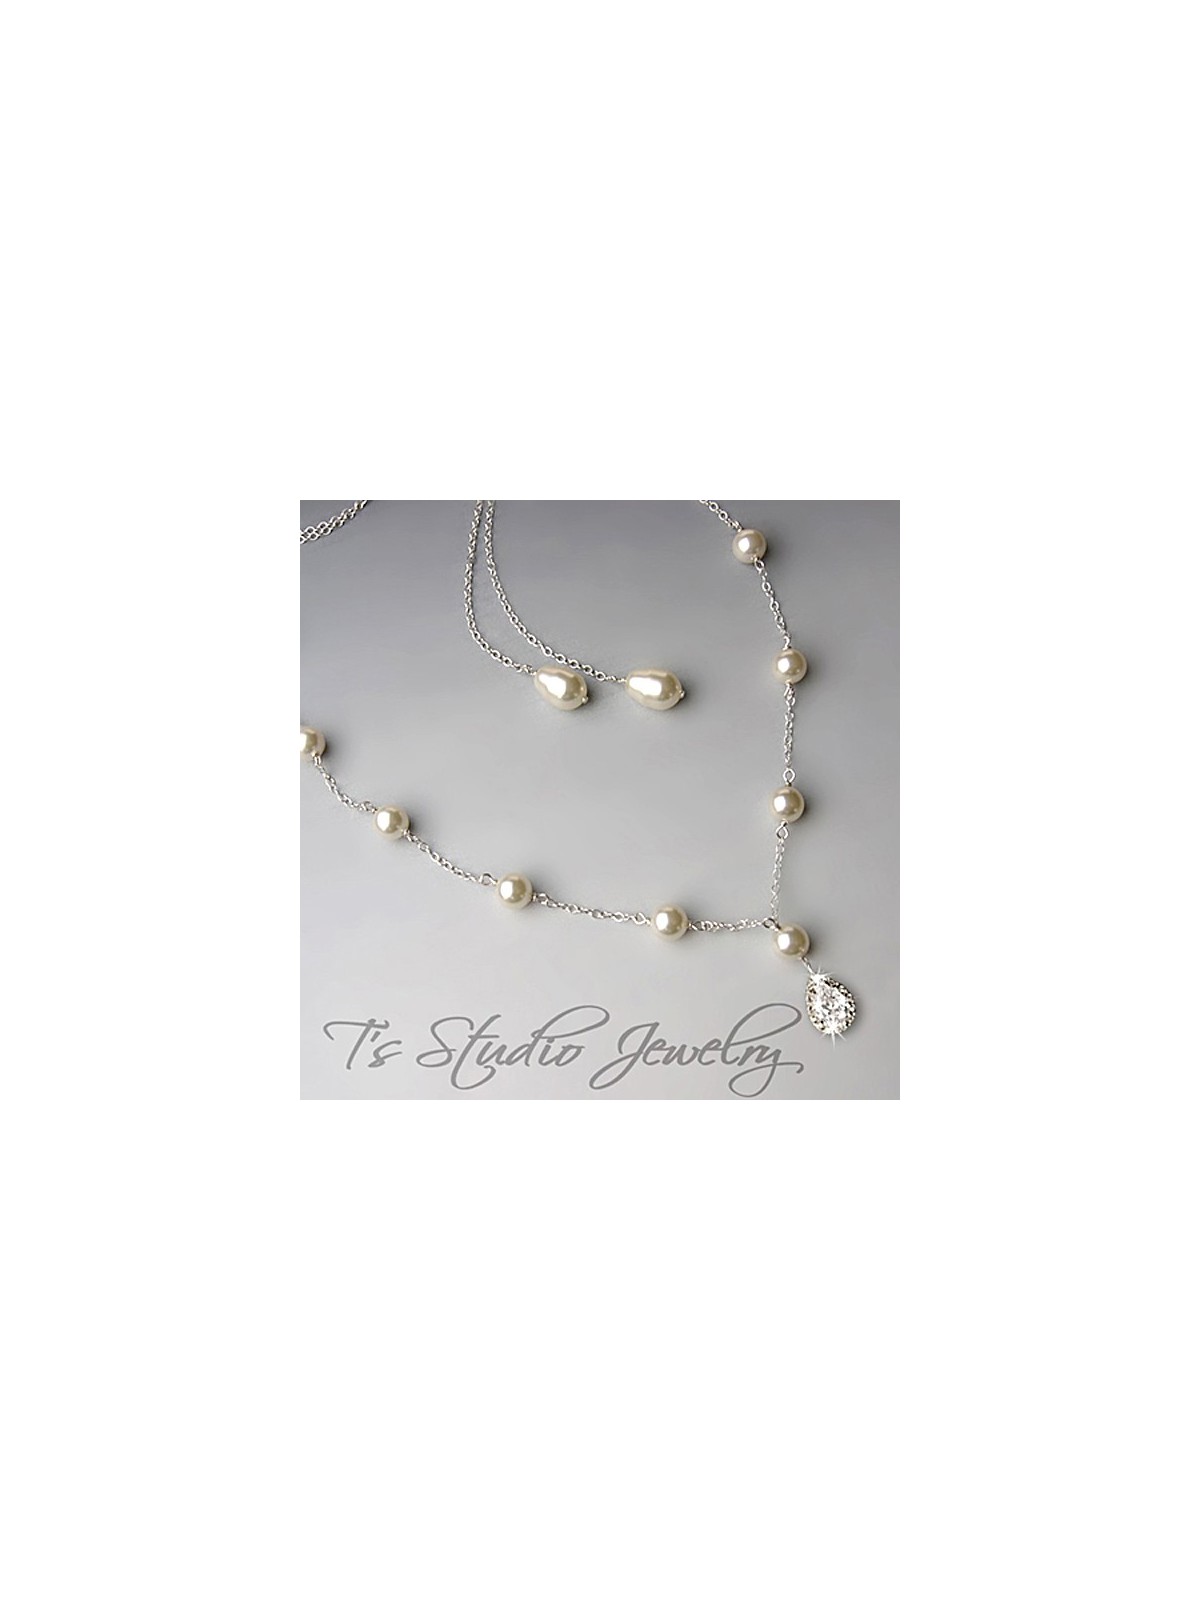 Pearl Backdrop Lariat Bridal Necklace Back Drop Silver or Gold Chain